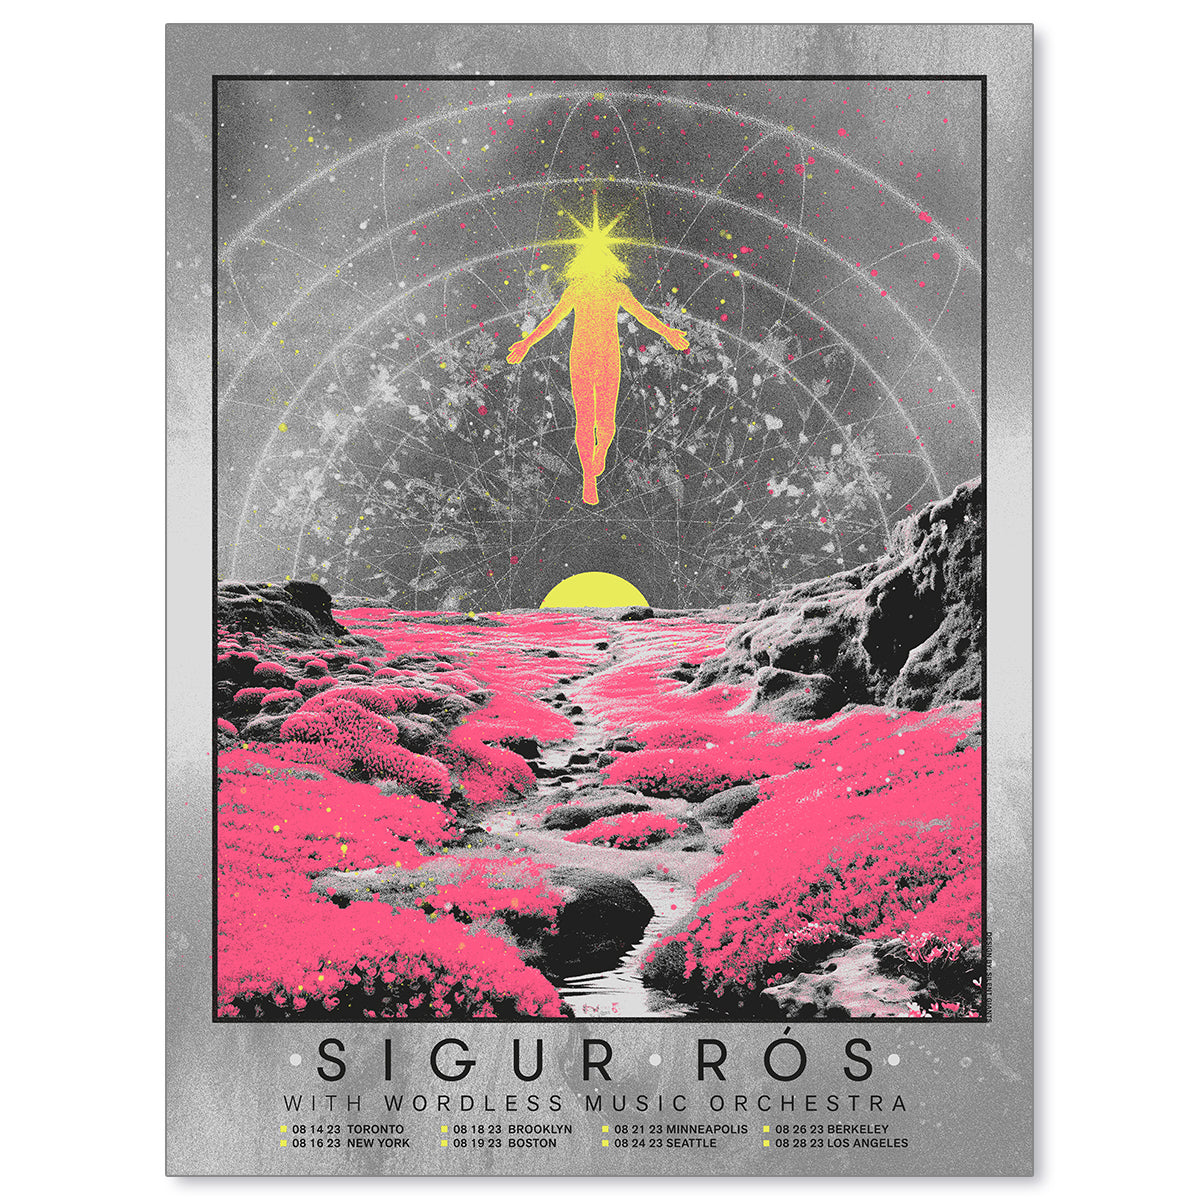 Sigur Ros with Wordless Music Orchestra North American Tour